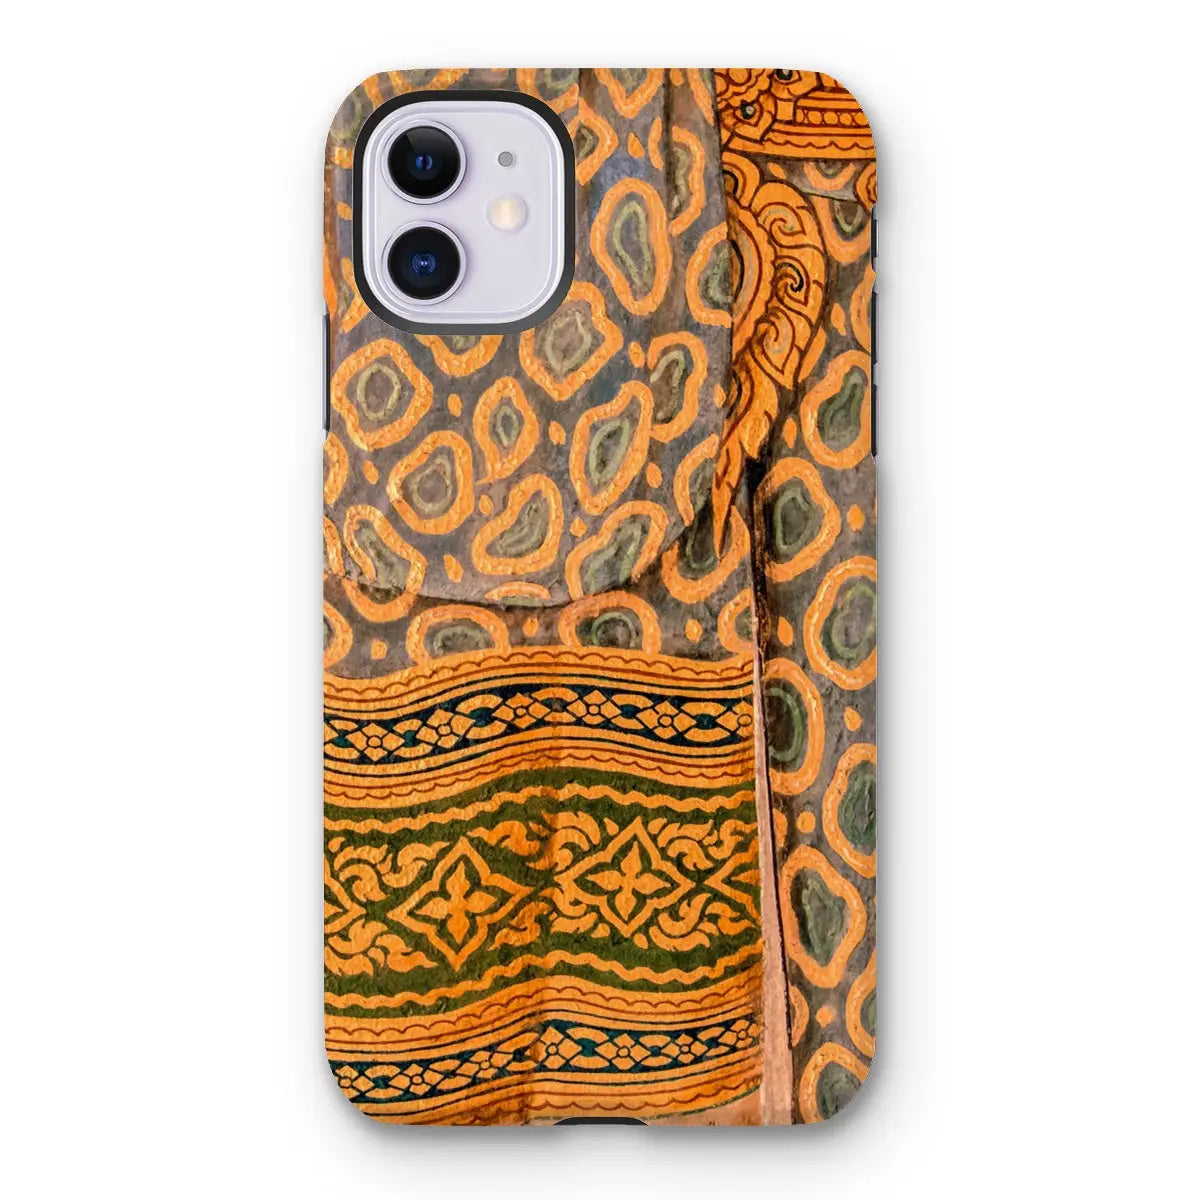 Lady In Waiting - Royal Siam Mural Art Phone Case - Iphone 11 / Matte - Mobile Phone Cases - Aesthetic Art